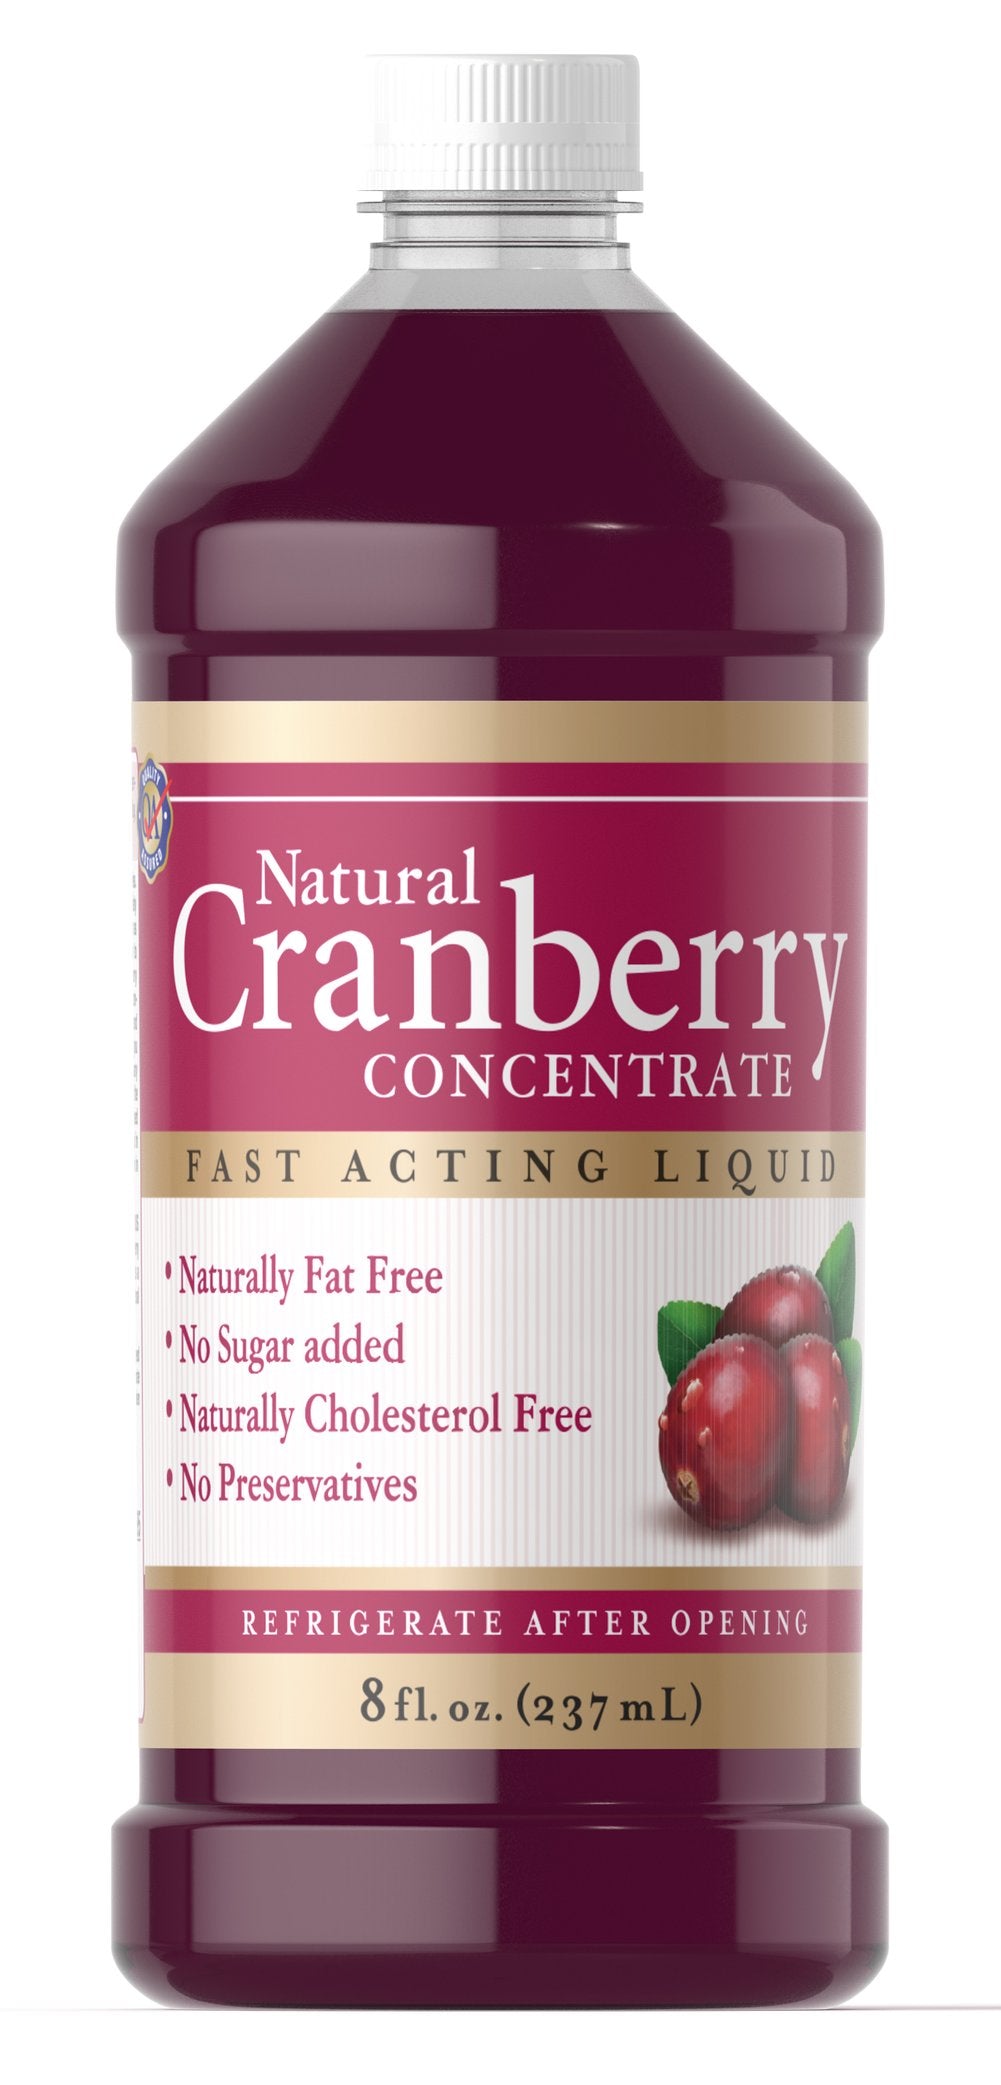 PURITAN’S PRIDE NATURAL CRANBERRY CONCENTRATE 237ML